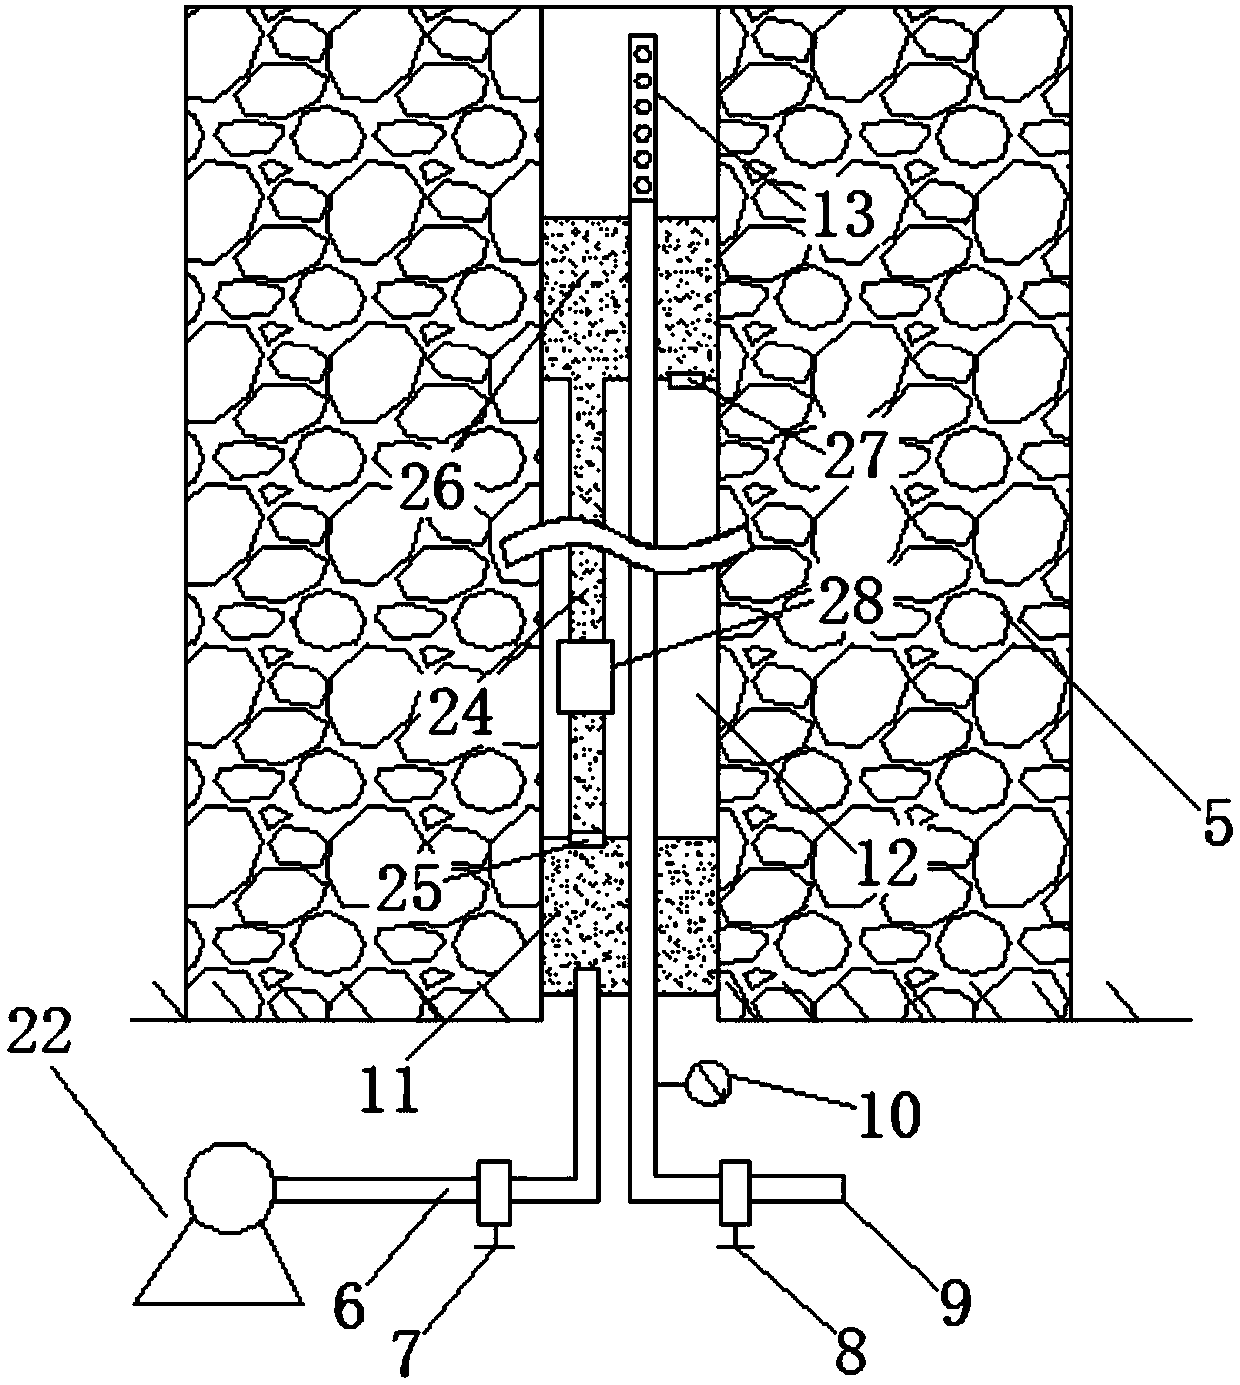 Soft coal step-by-step zooming hydraulic fracturing anatonosis device and method